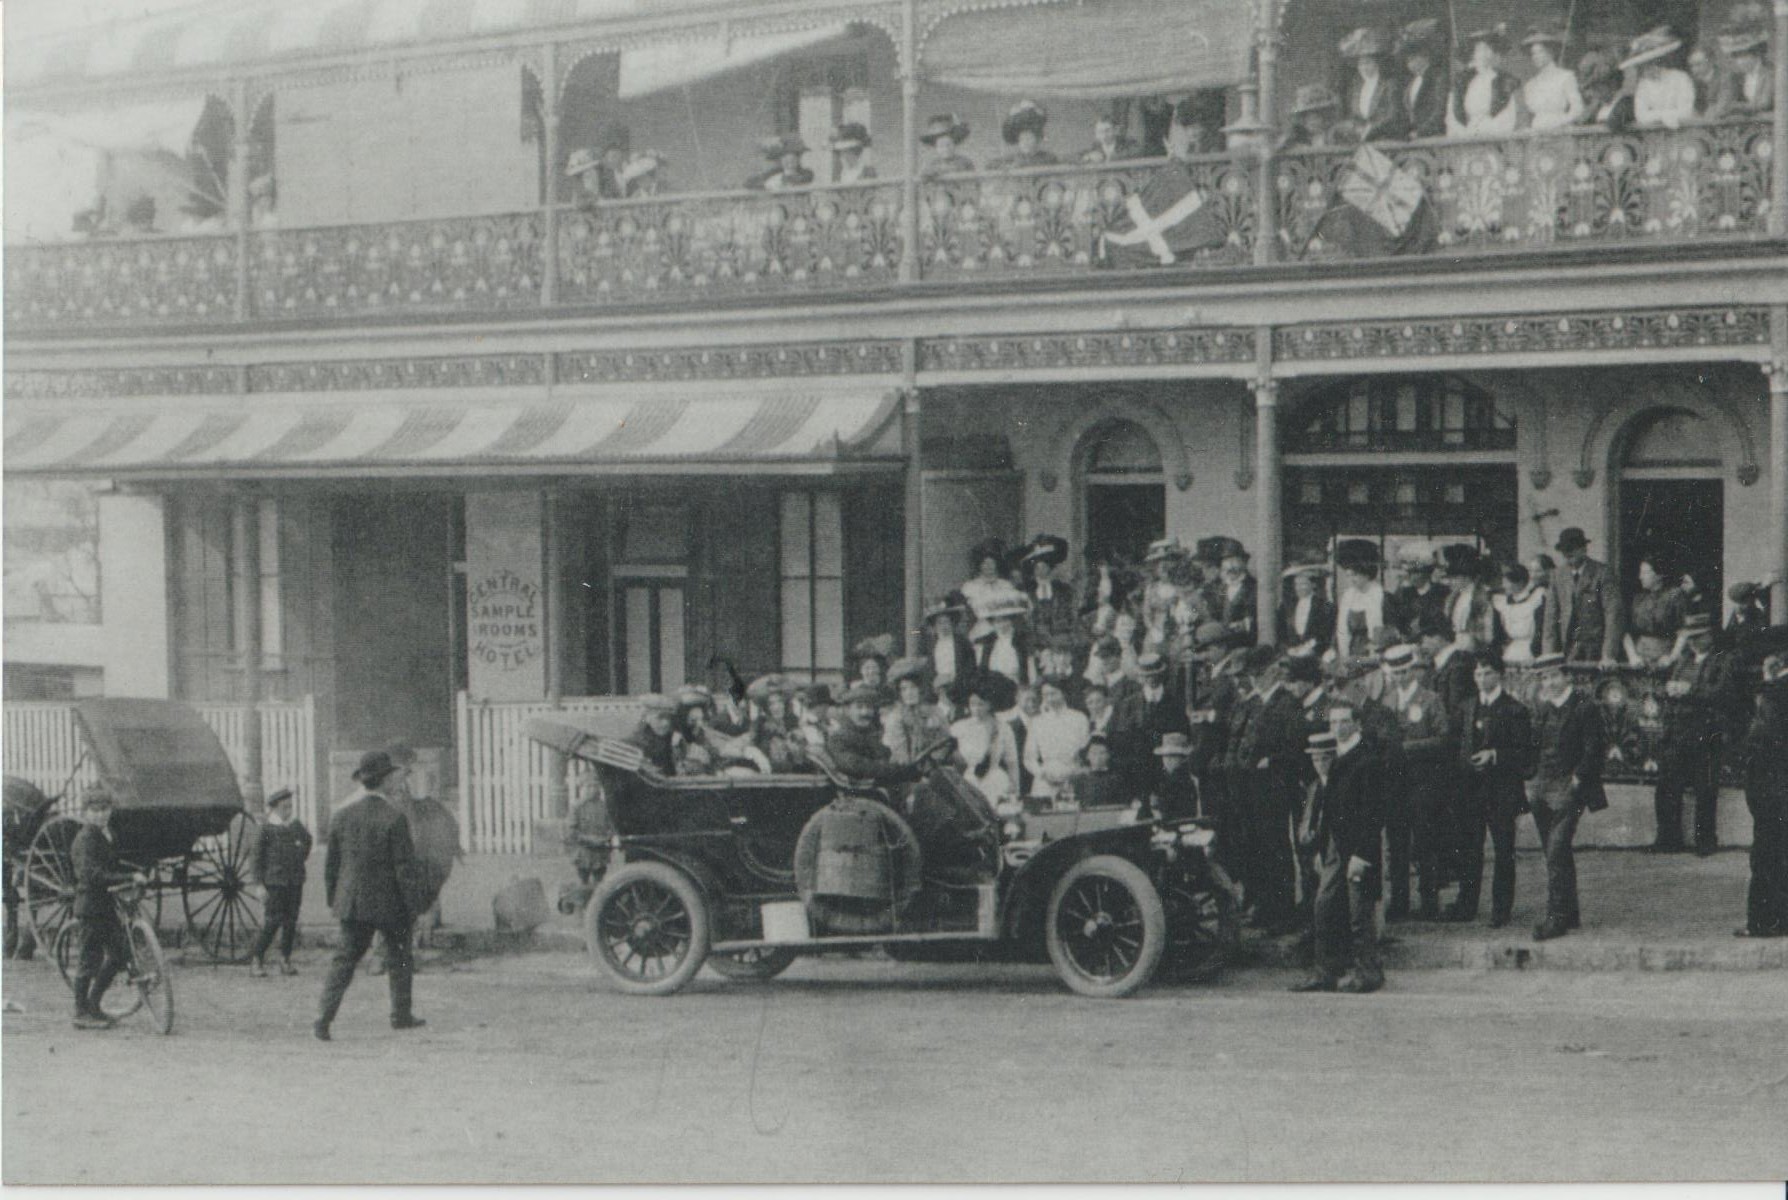 Image 2 of 4 - Black and white image of men and women in an old motor car. The car is on the street next to a building which is a hotel, with people looking out from the bottom floor entrance and on the balcony above.